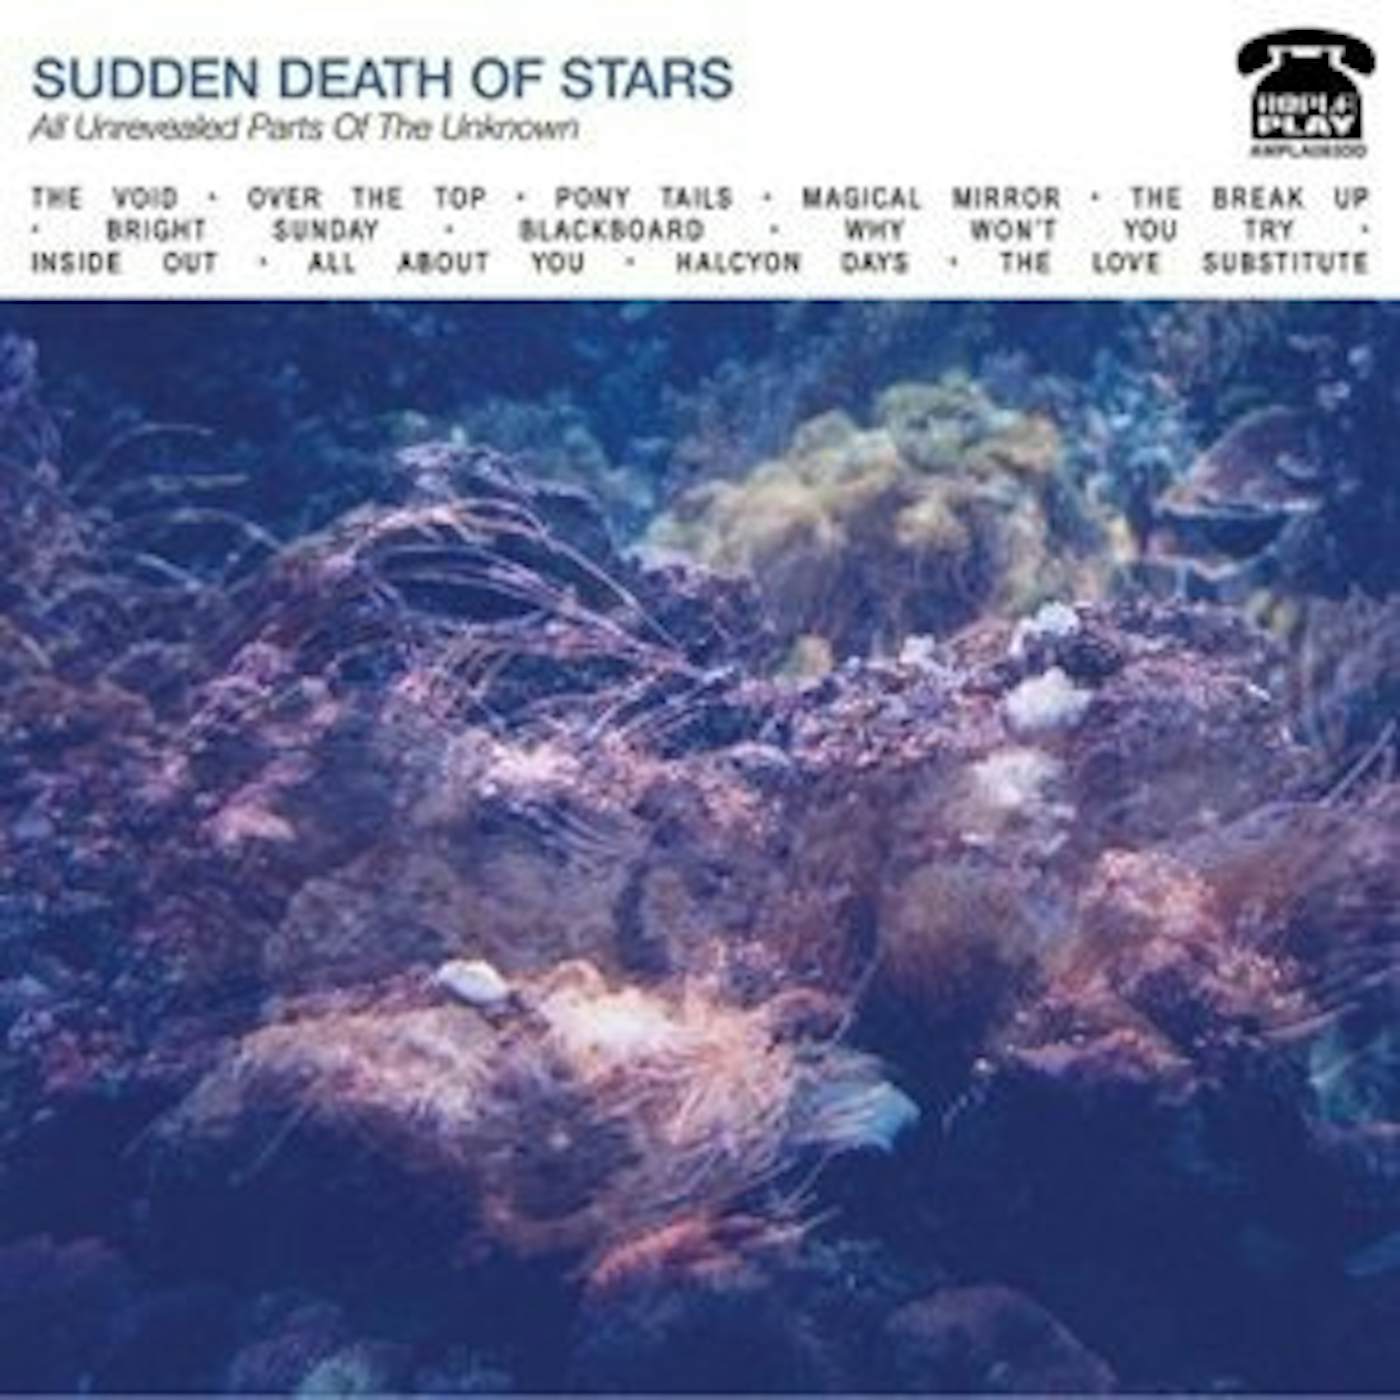 The Sudden Death of Stars All Unrevealed Parts Of The Unknown Vinyl Record